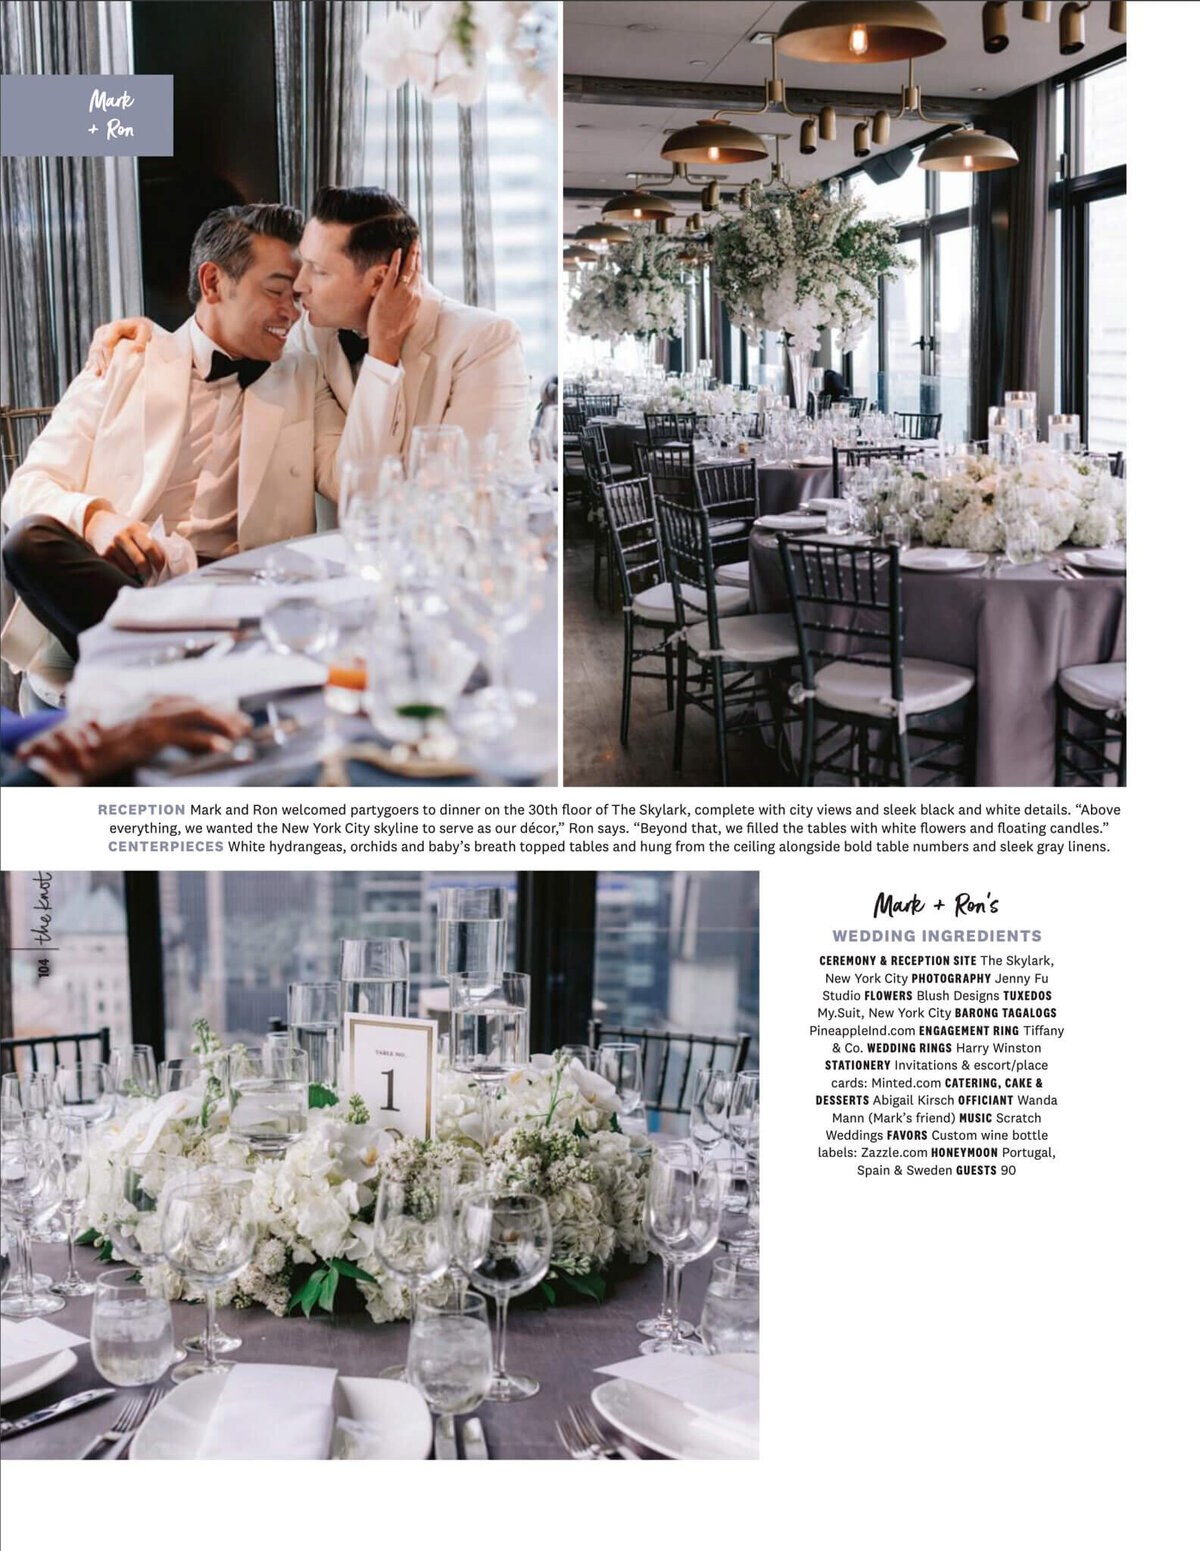 A page in The Knot Magazine where there are images of two grooms and their wedding venue. Image by Jenny Fu Studio